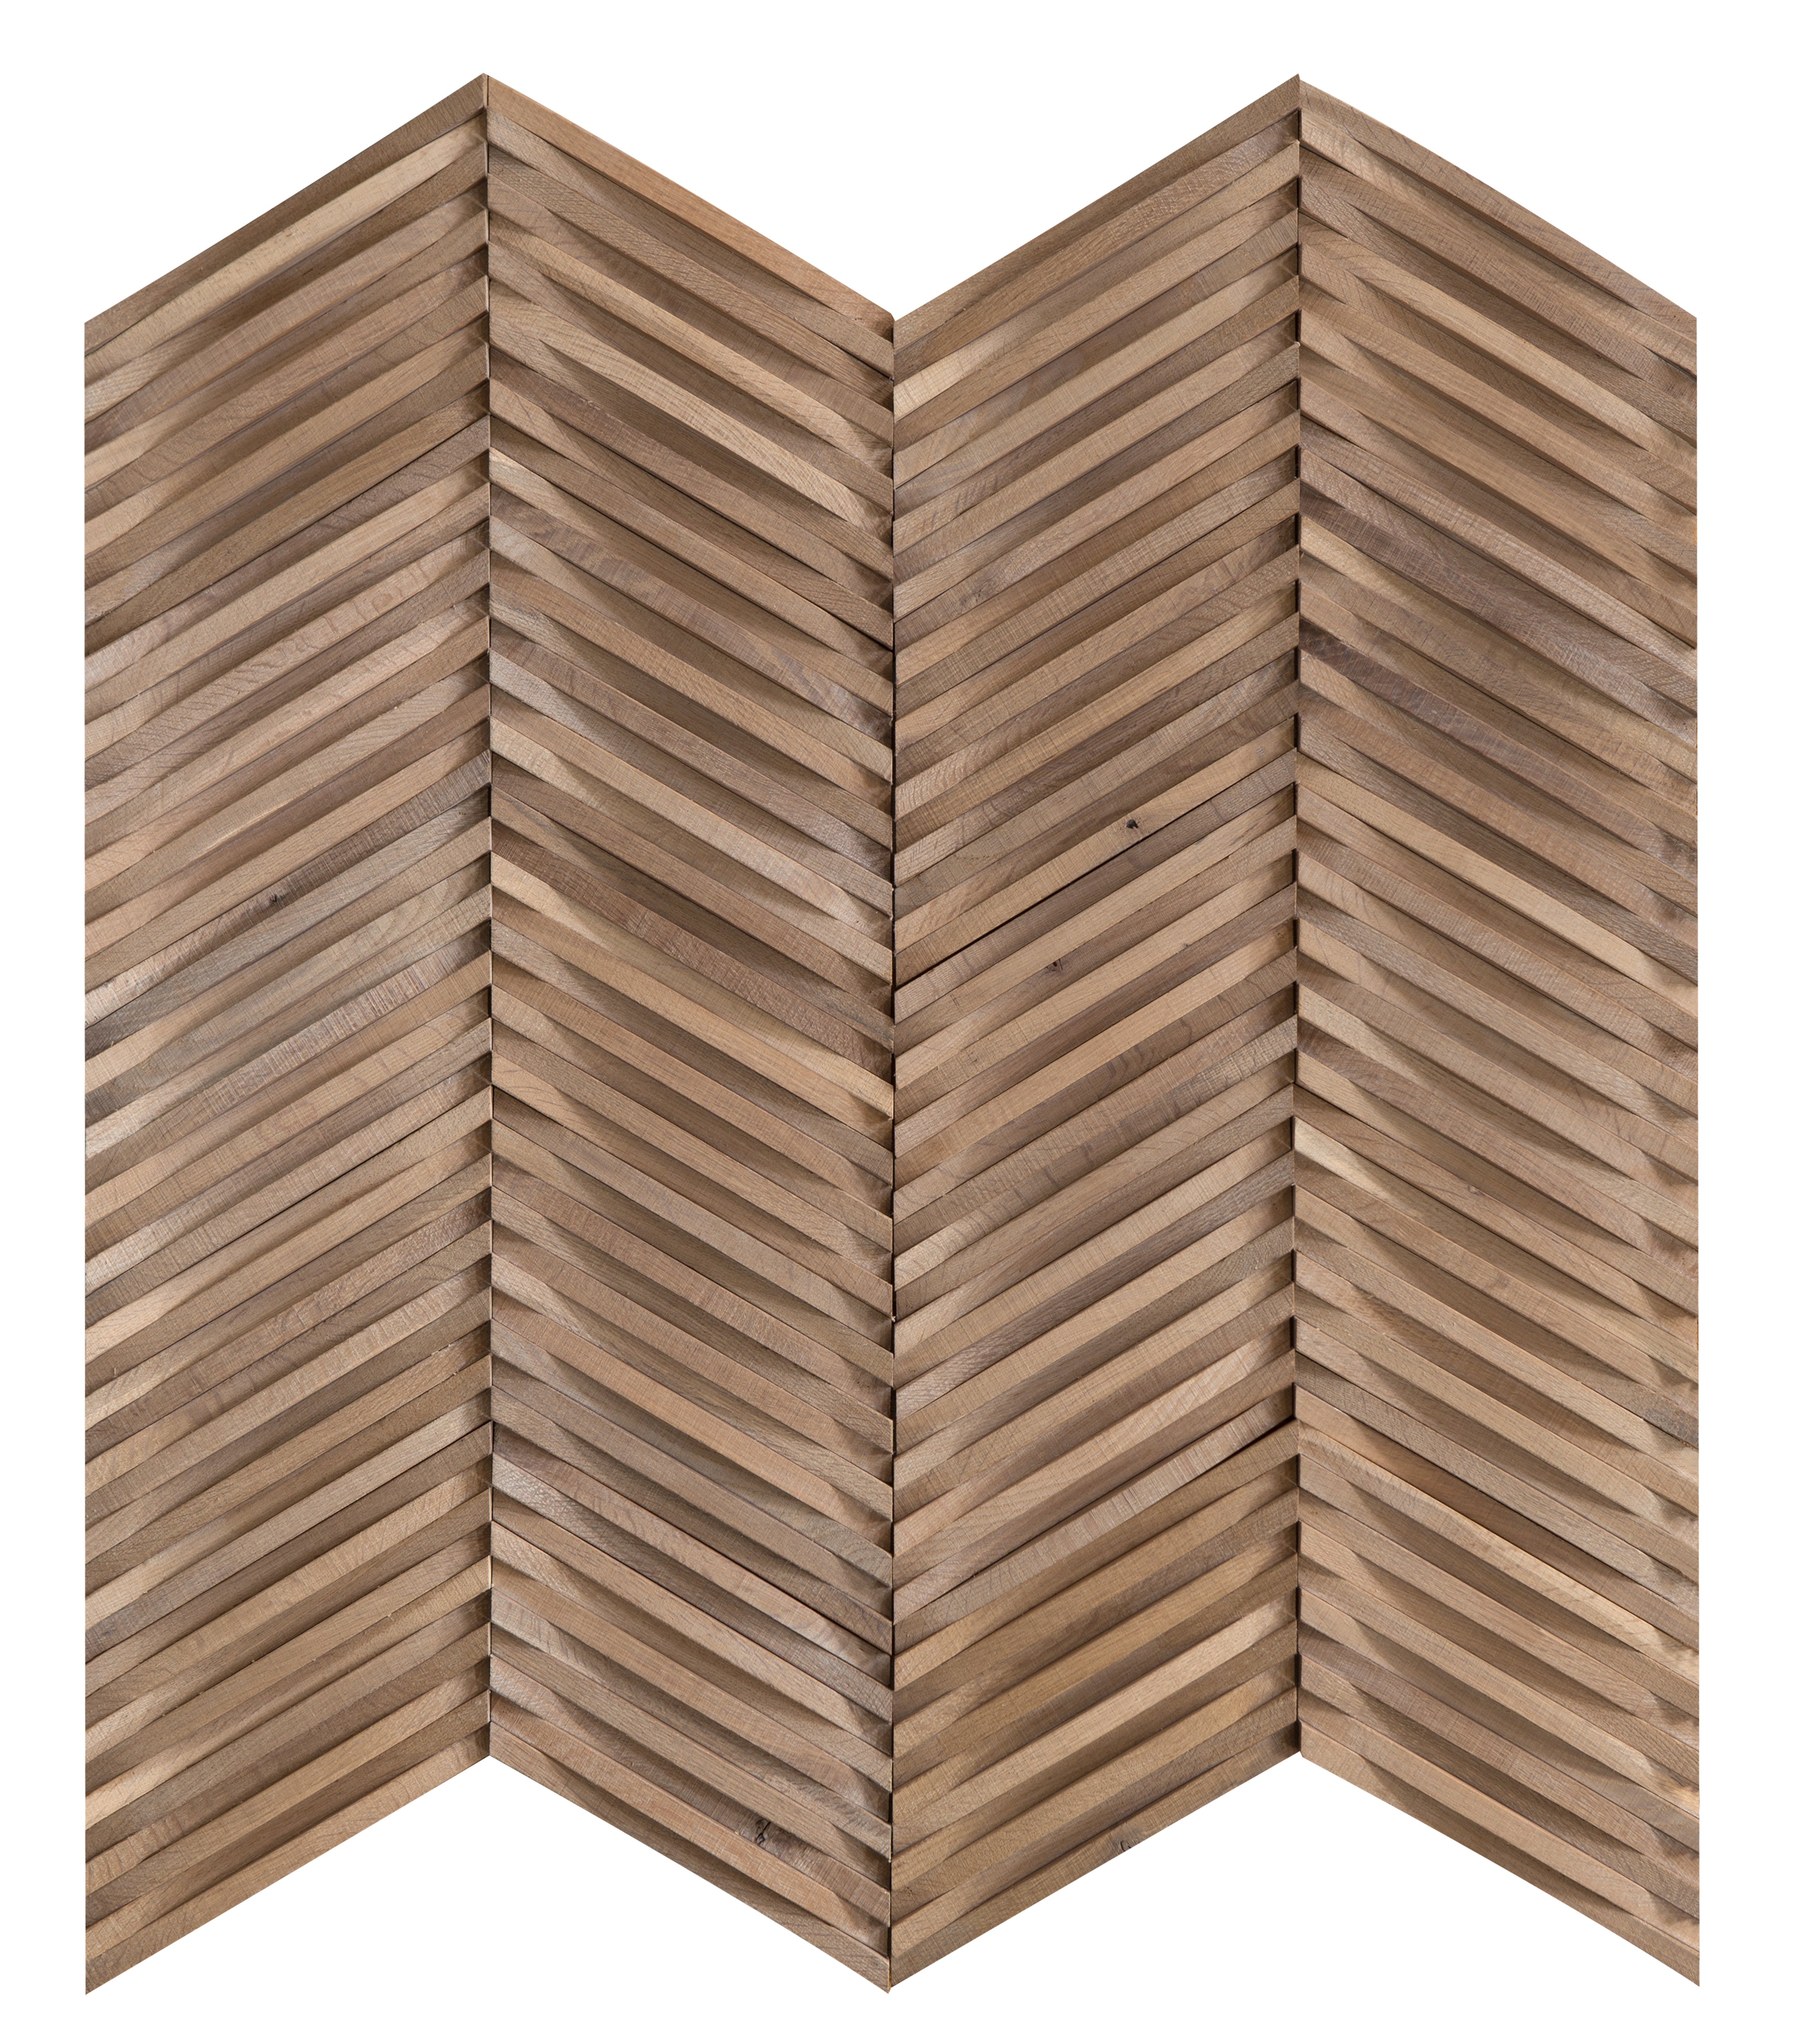 duchateau inceptiv curva chevron lugano oak three dimensional wall natural wood panel matte lacquer for interior use distributed by surface group international